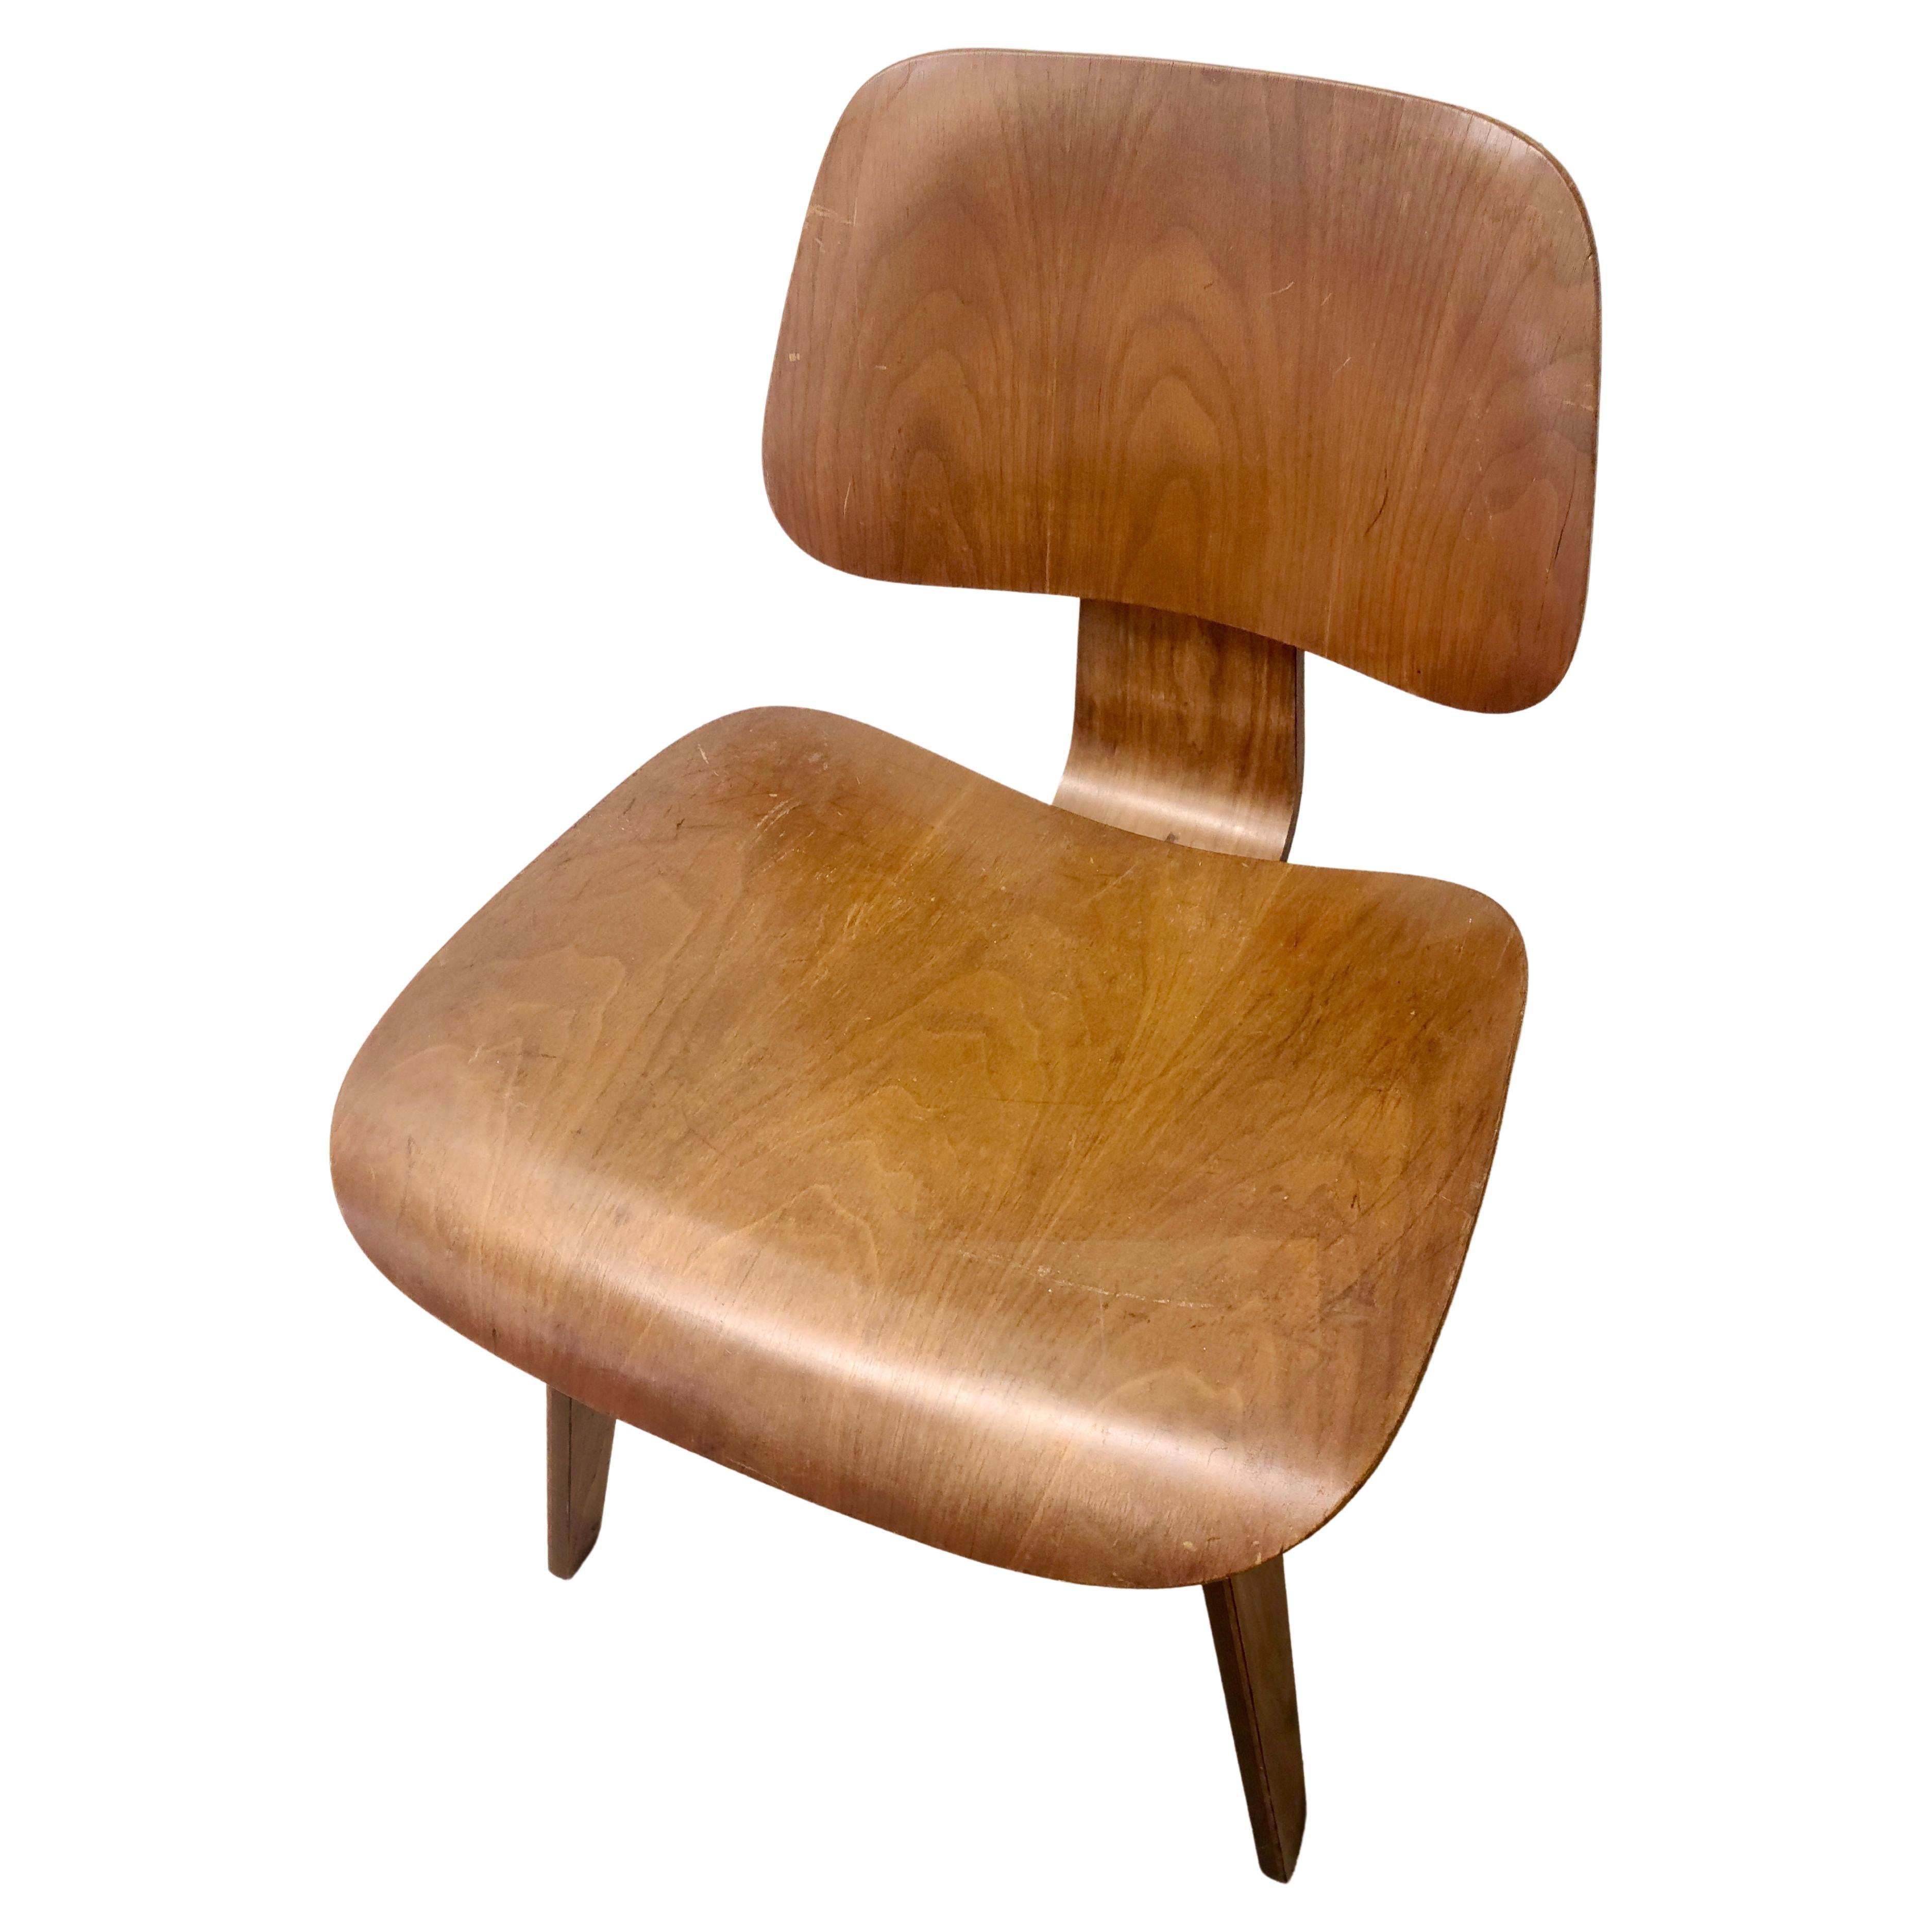 Mid-20th Century Eames Herman Miller Molded Plywood Walnut DCW Dining Chair Wood